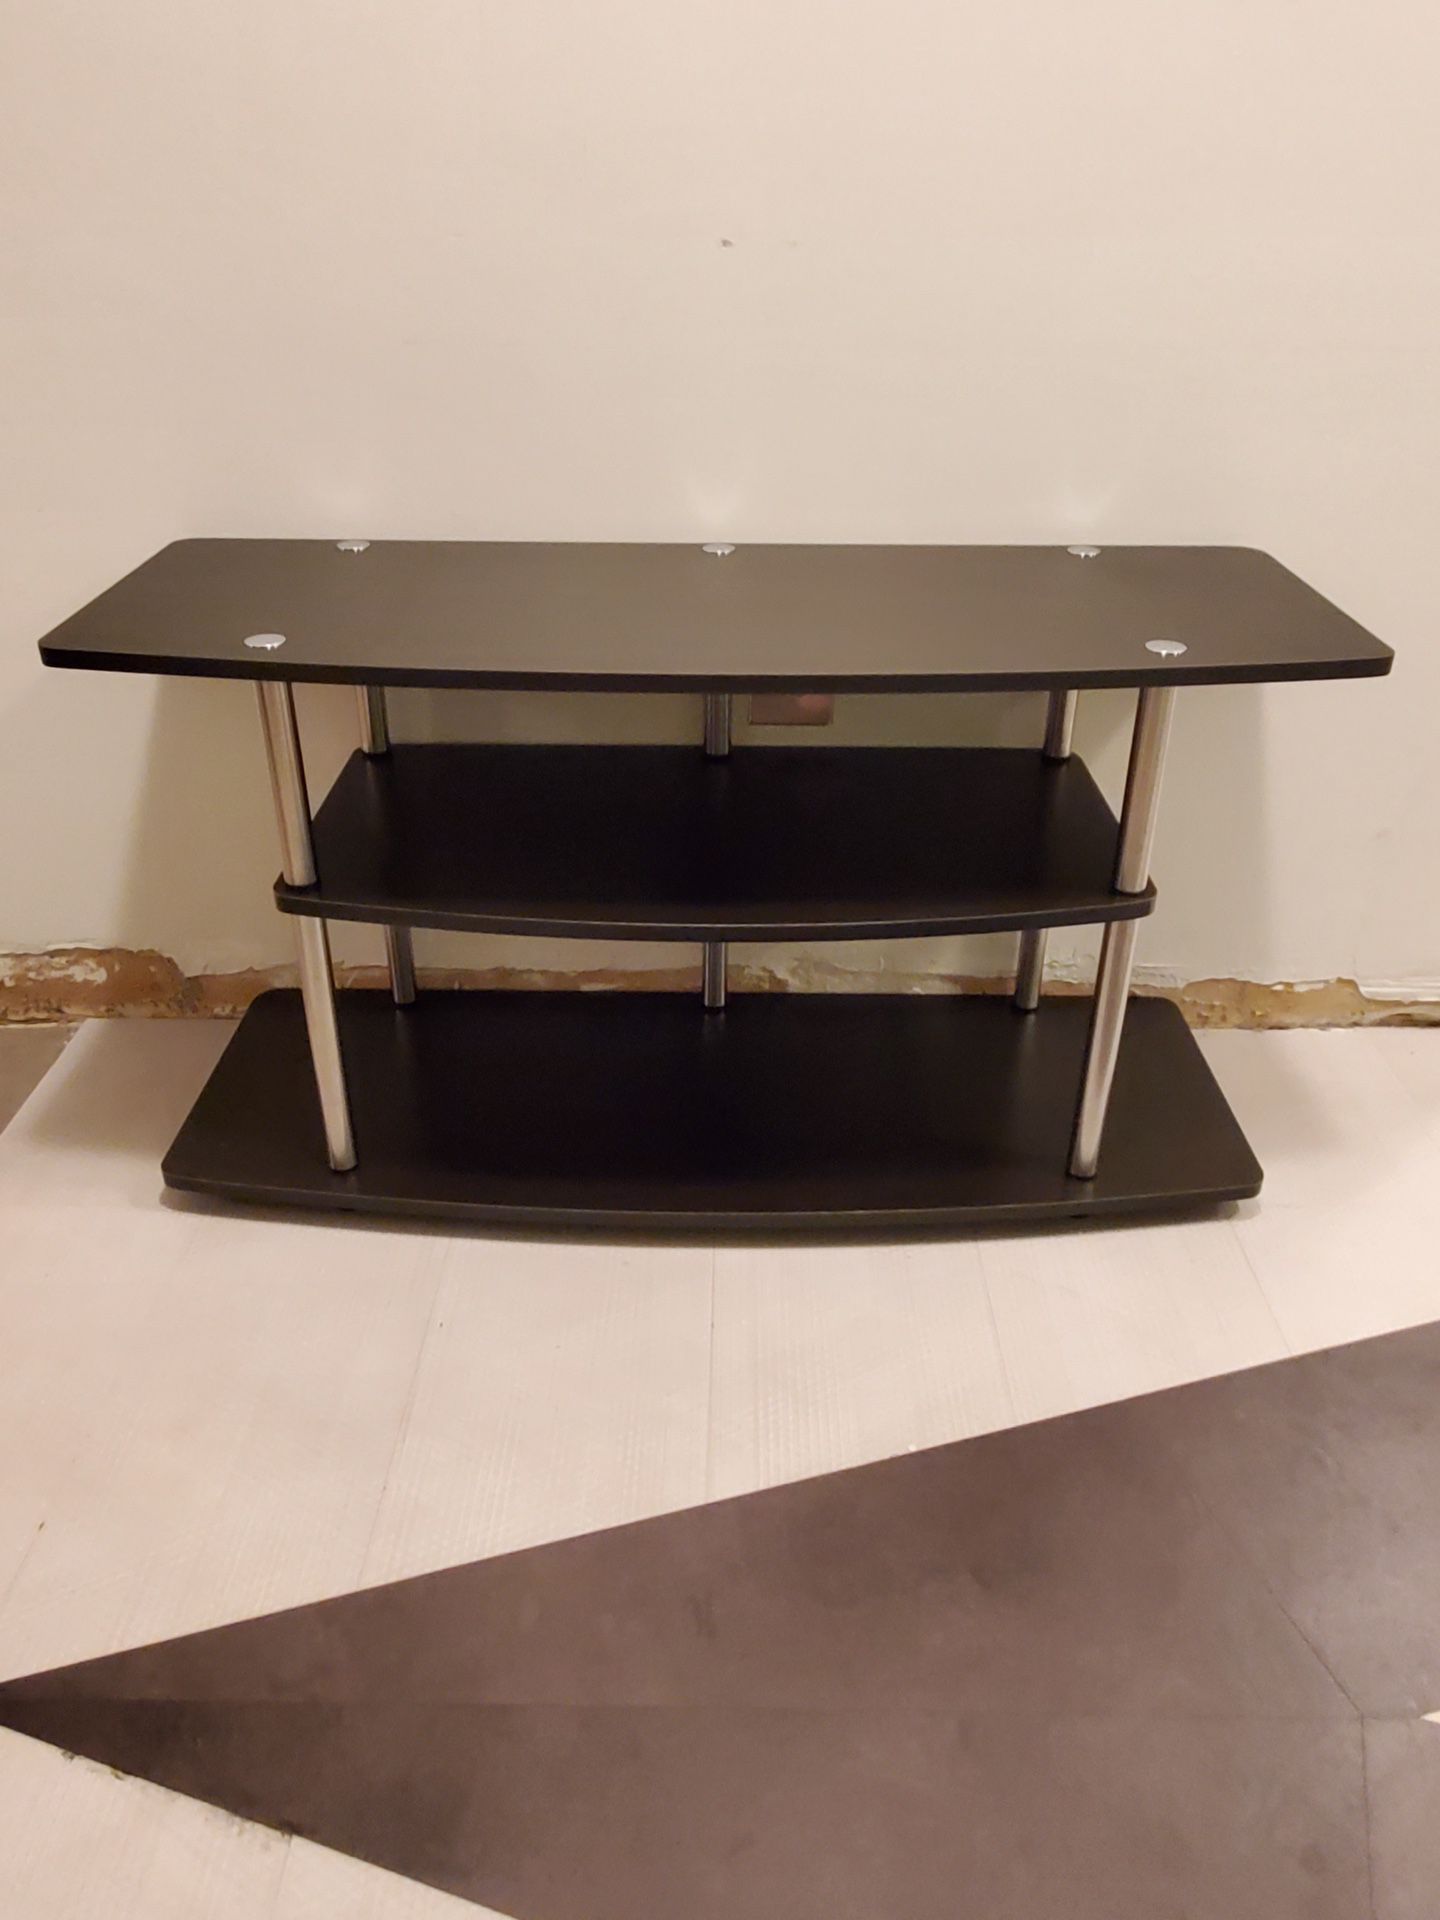 TV Stand - 42" L x 24” H x 15.75" W - weighs approximately 35 lbs. - price ASSEMBLED (also available UNASSEMBLED for lower price) - firm prices